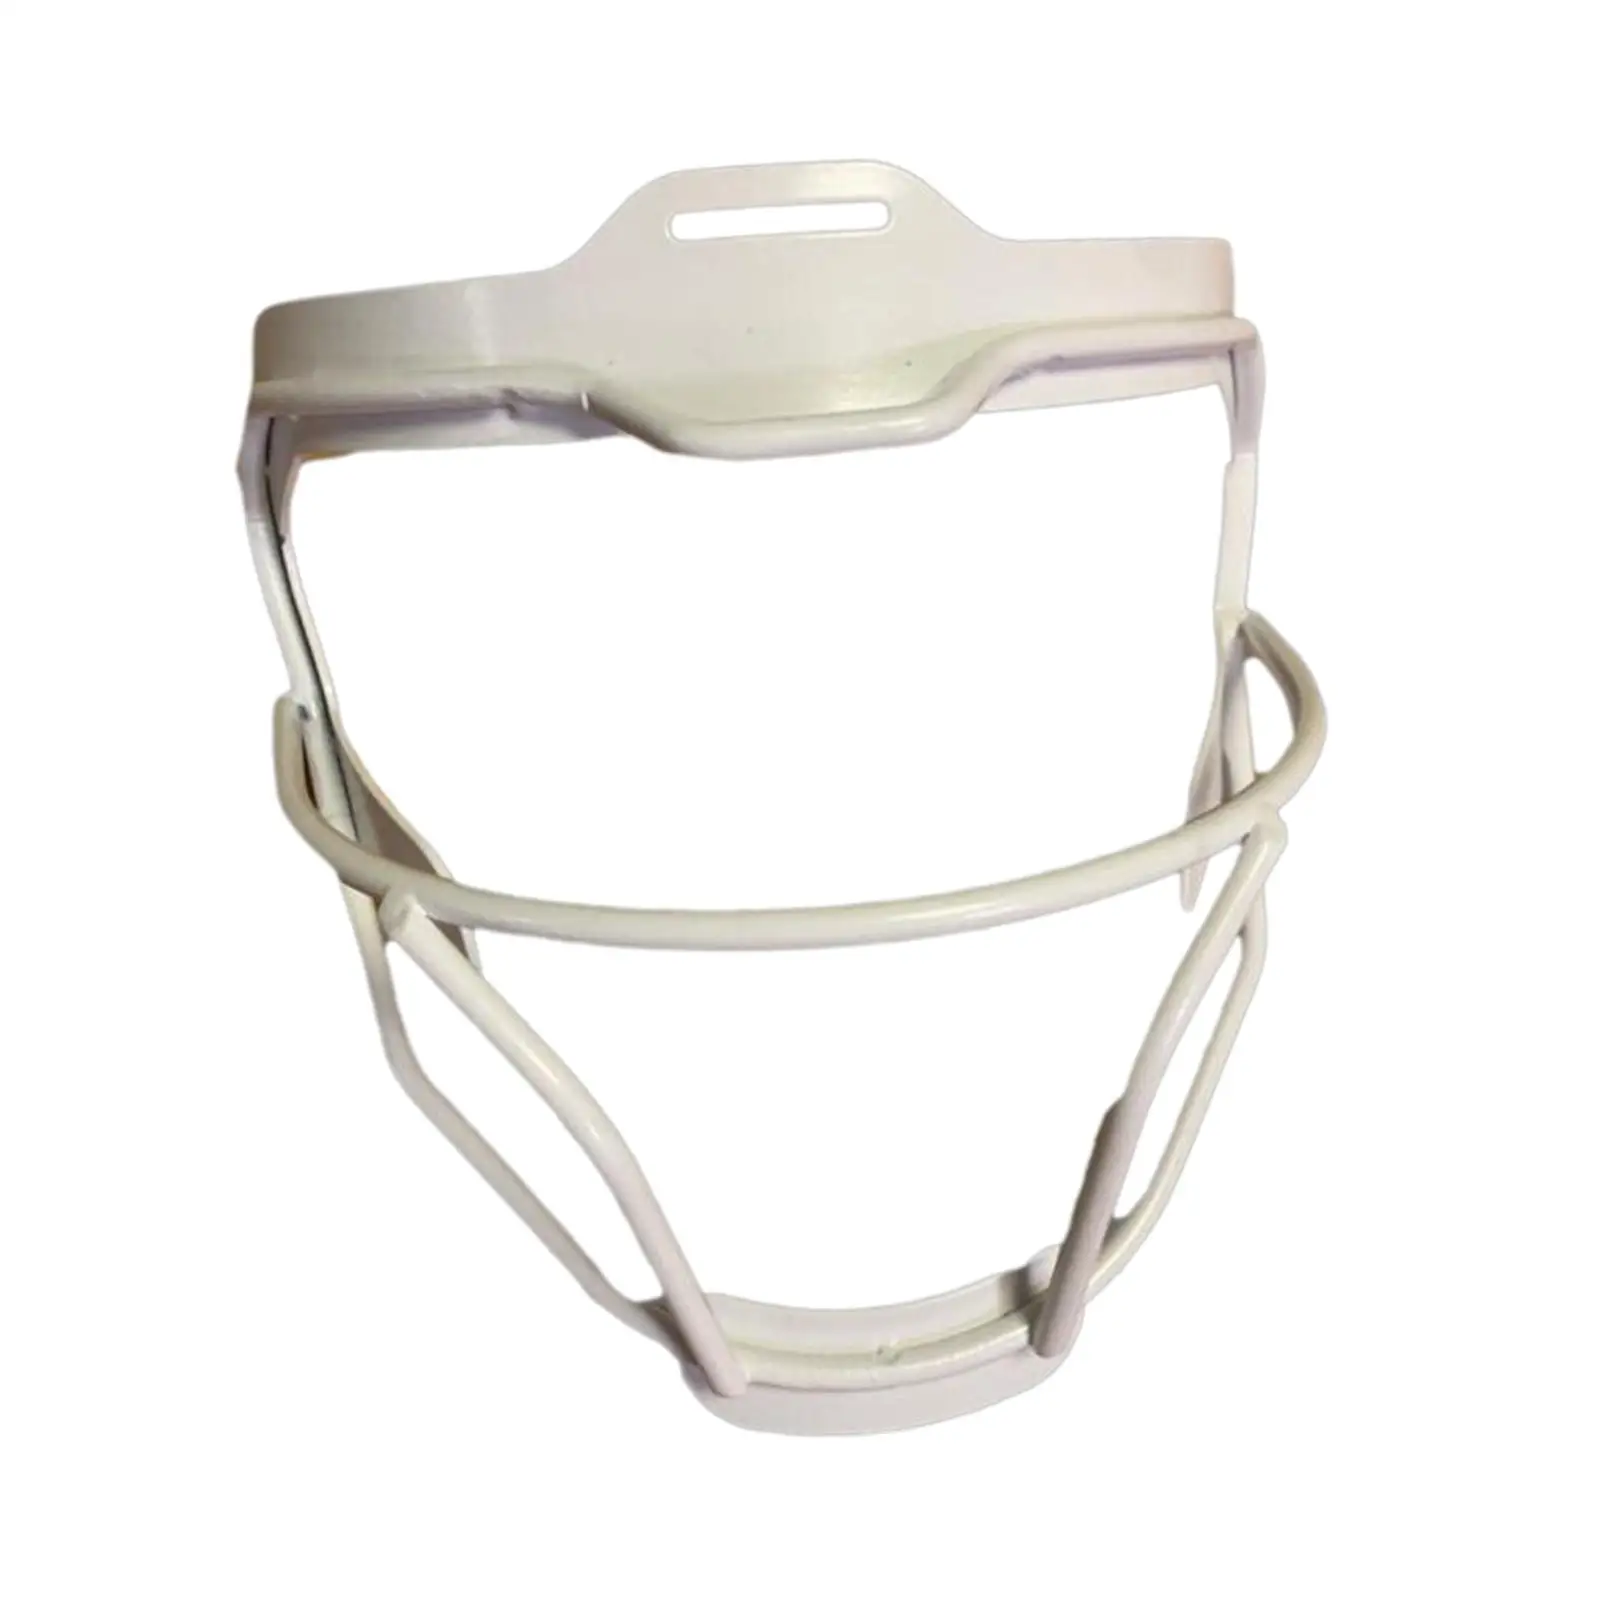 Universal Softball Batting Mask Face Guards Iron Wire Protective Shield for Women Men Protection Outdoor Safety Junior